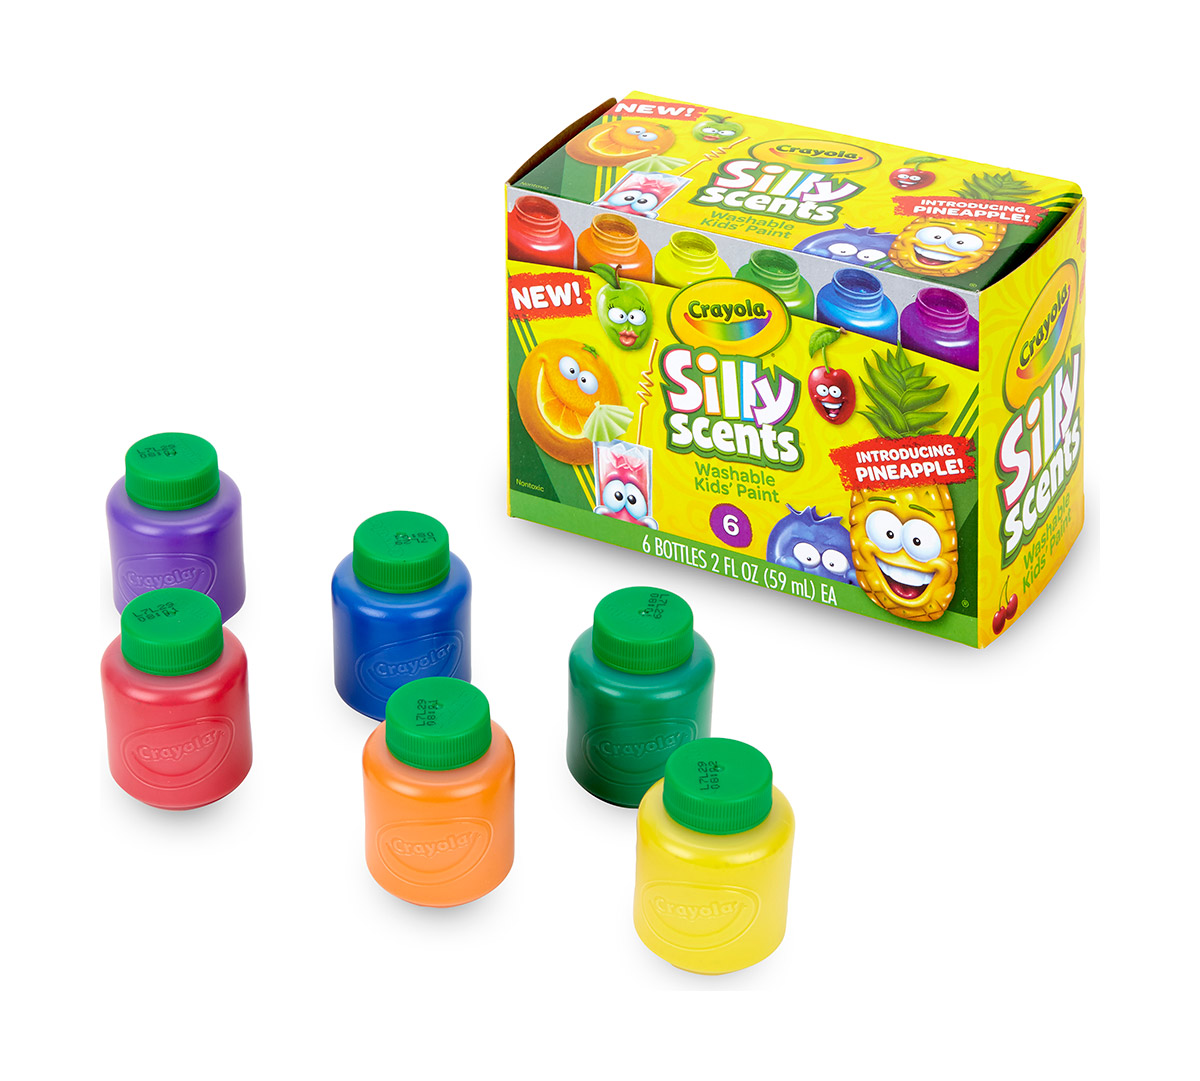 Crayola Silly Scents Washable Kids' Paint, 6 Colors in 2-Ounce Bottles